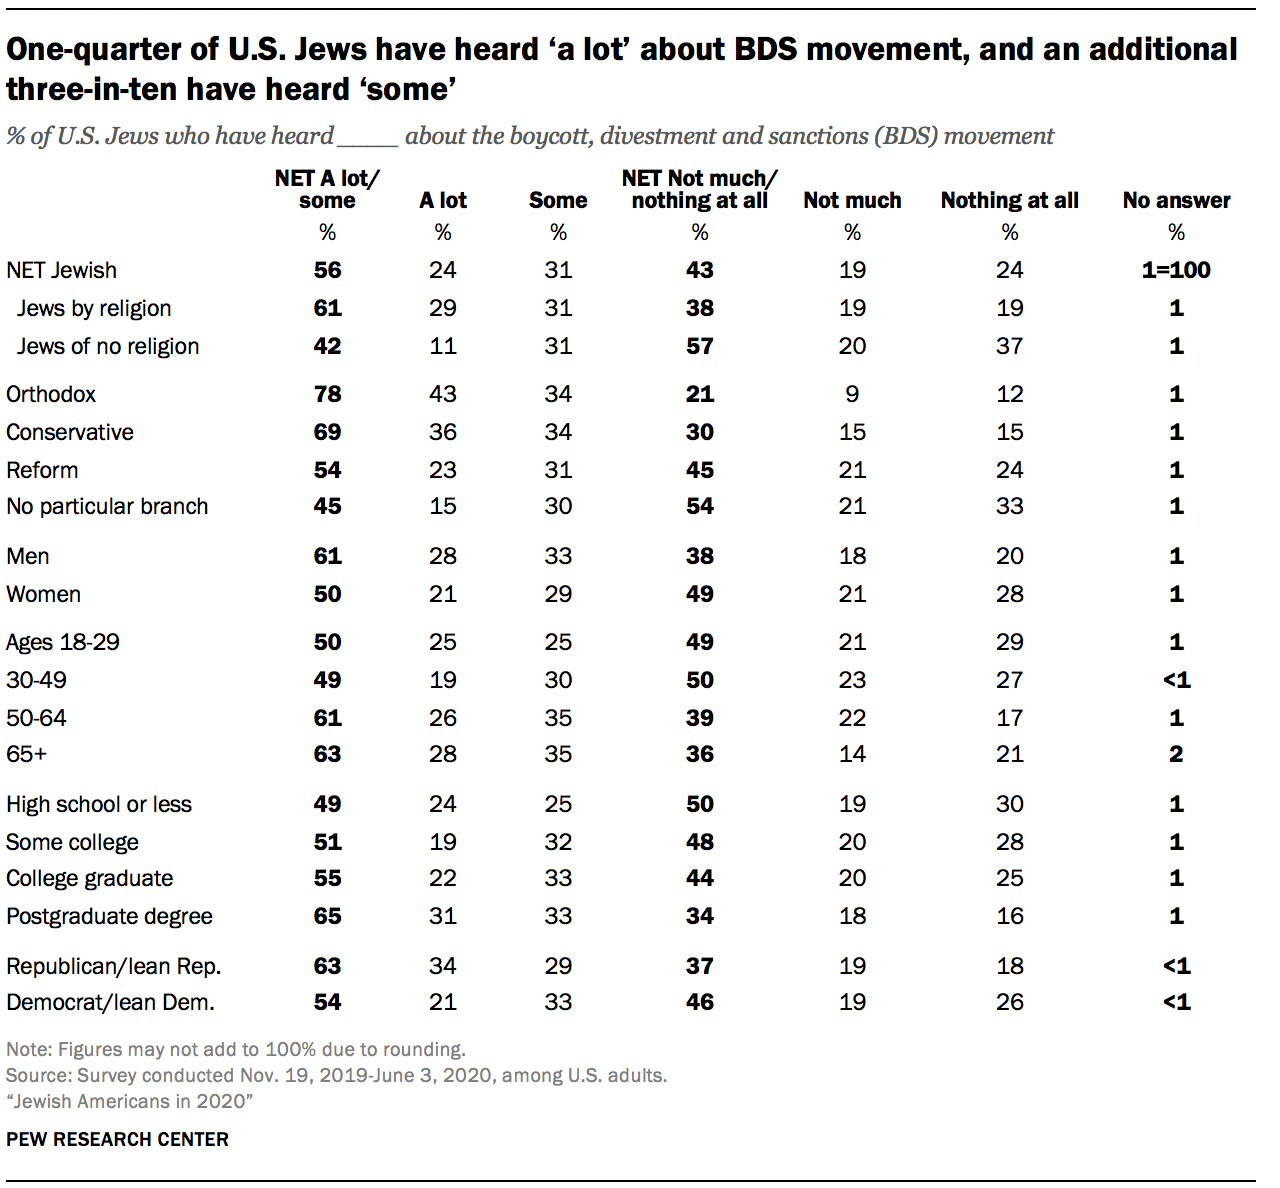 One-quarter of U.S. Jews have heard ‘a lot’ about BDS movement, and an additional three-in-ten have heard ‘some’